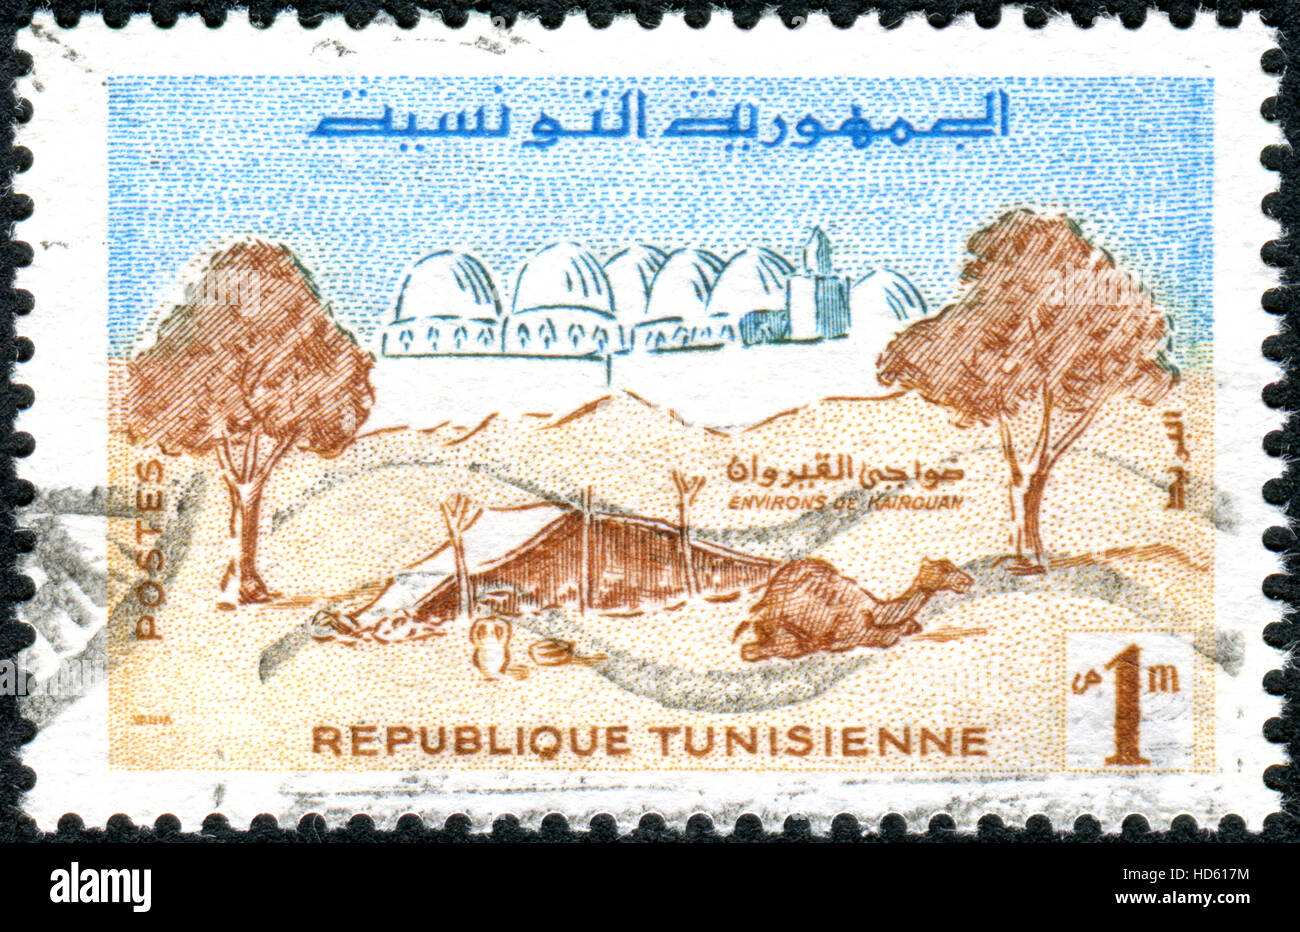 A stamp printed in Tunisia, shows the view of the ancient city of Kairouan - the holiest city of the Maghreb Muslims Stock Photo